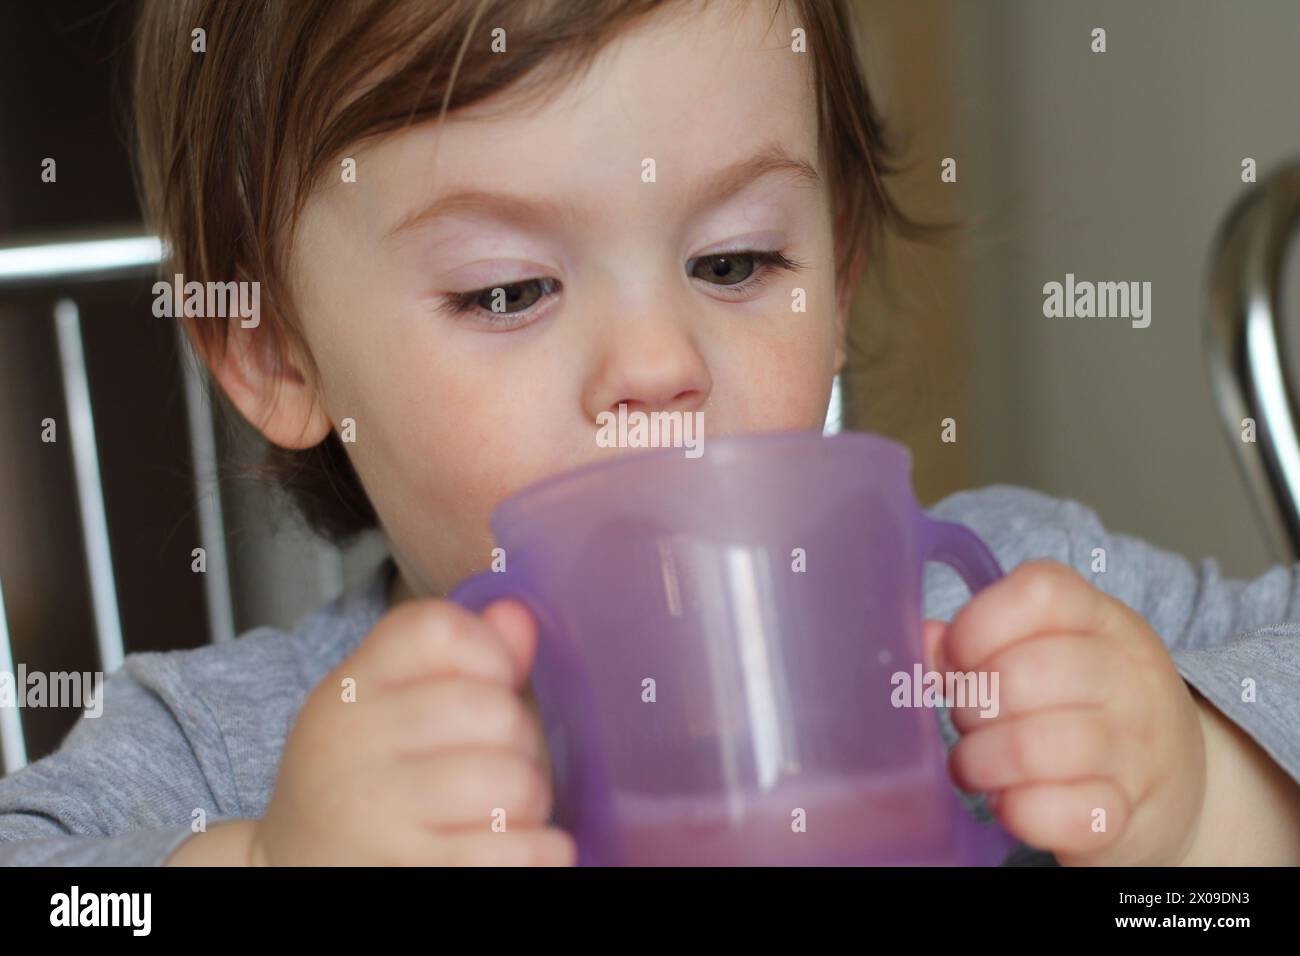 A small child drinks from a two-handed cup. Learning to drink from a cup independently. Developmental milestones and the joy of everyday family life Stock Photo